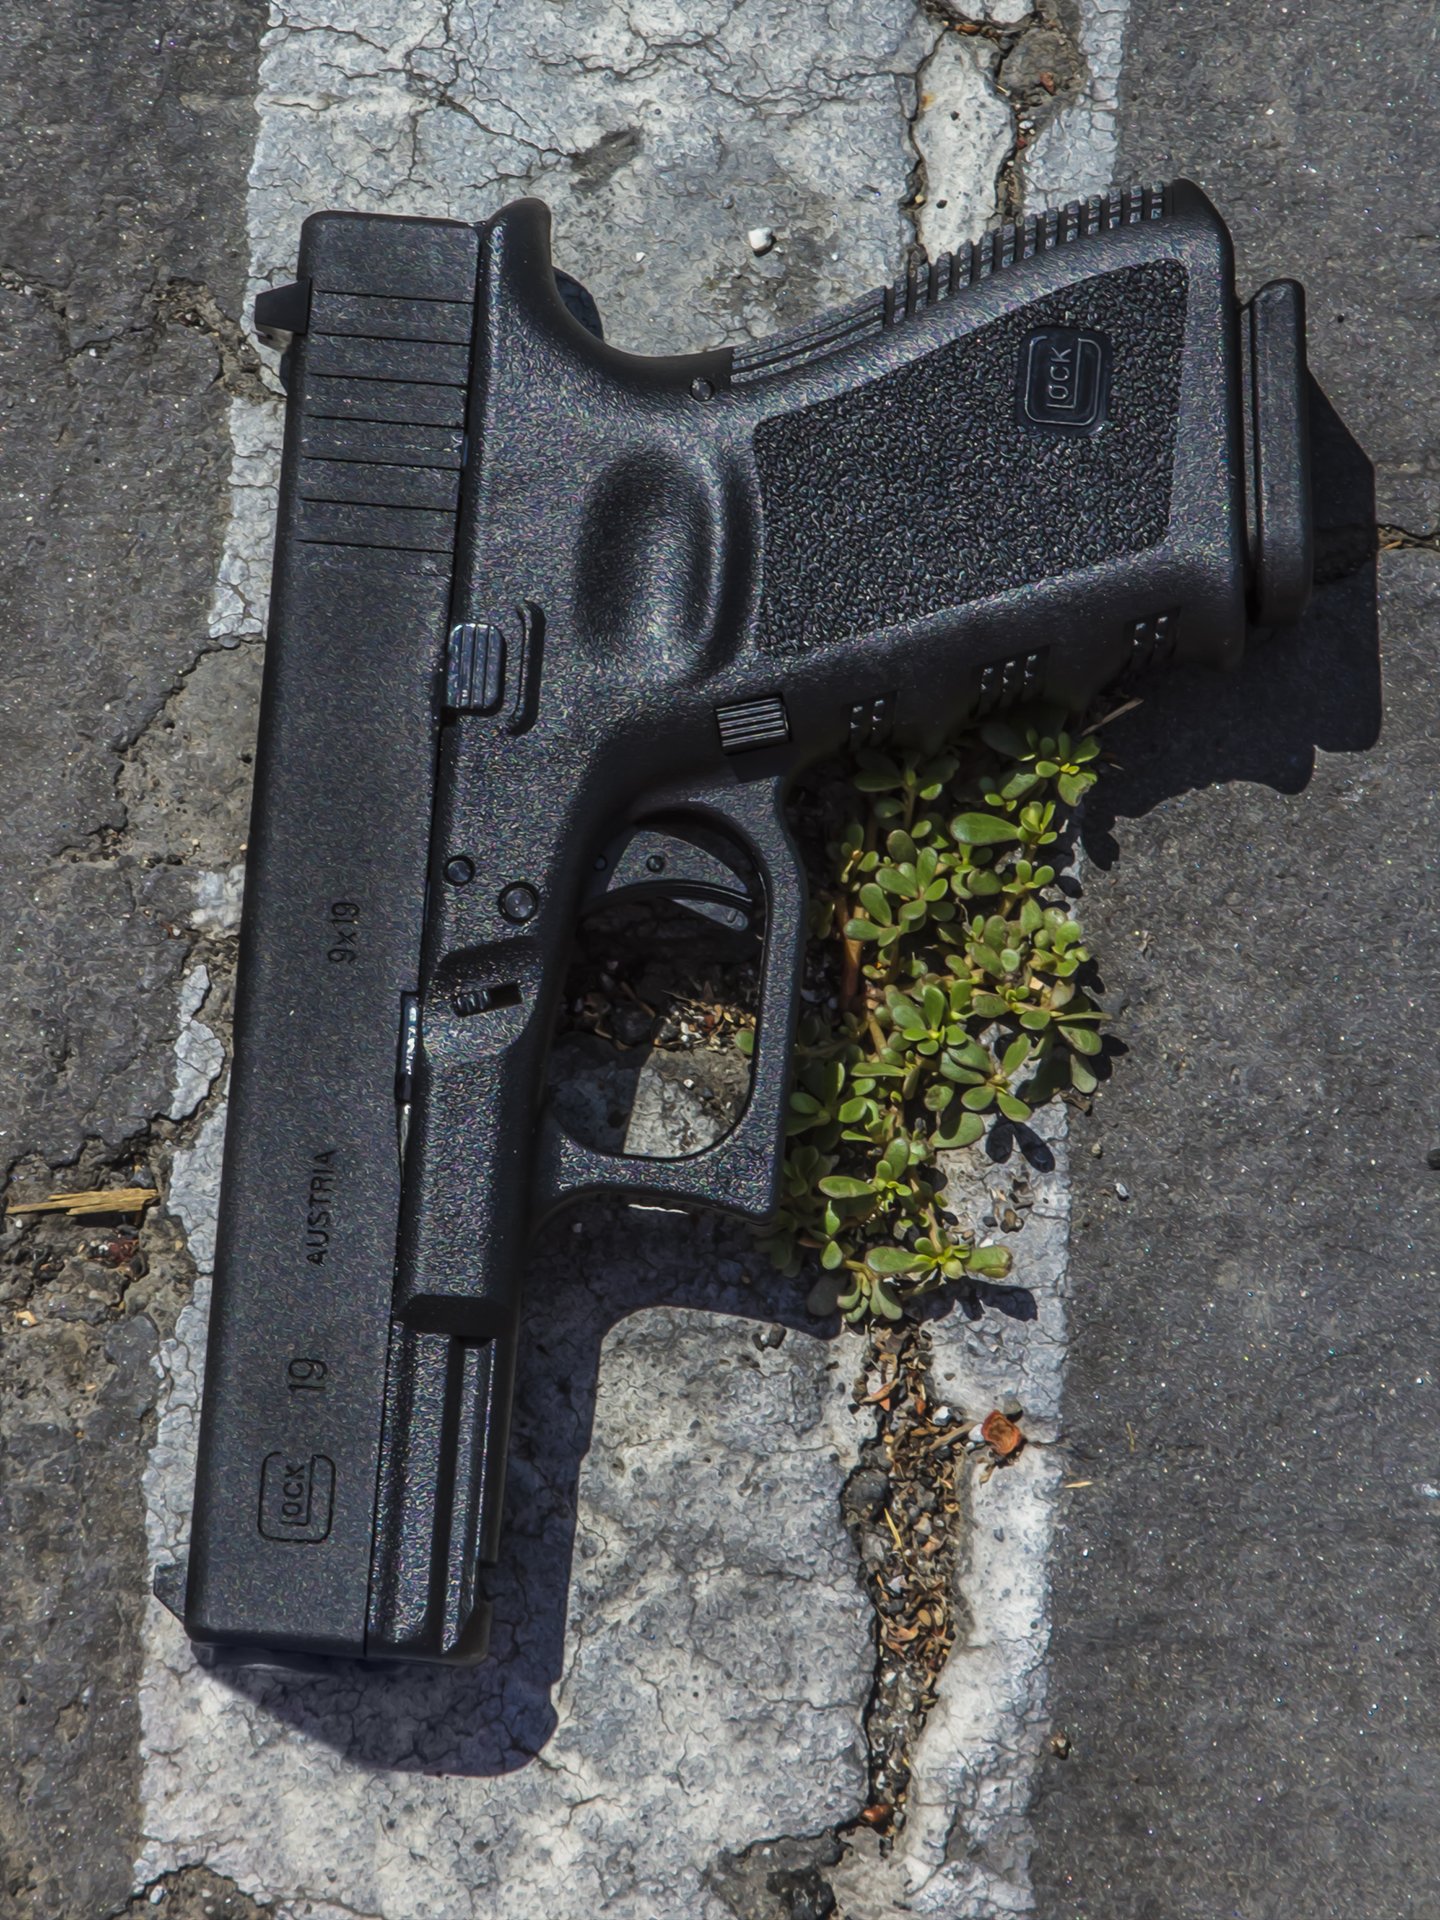 Airsoft Review of The Elite Force Glock 19 by VFC - $170 Airsoft